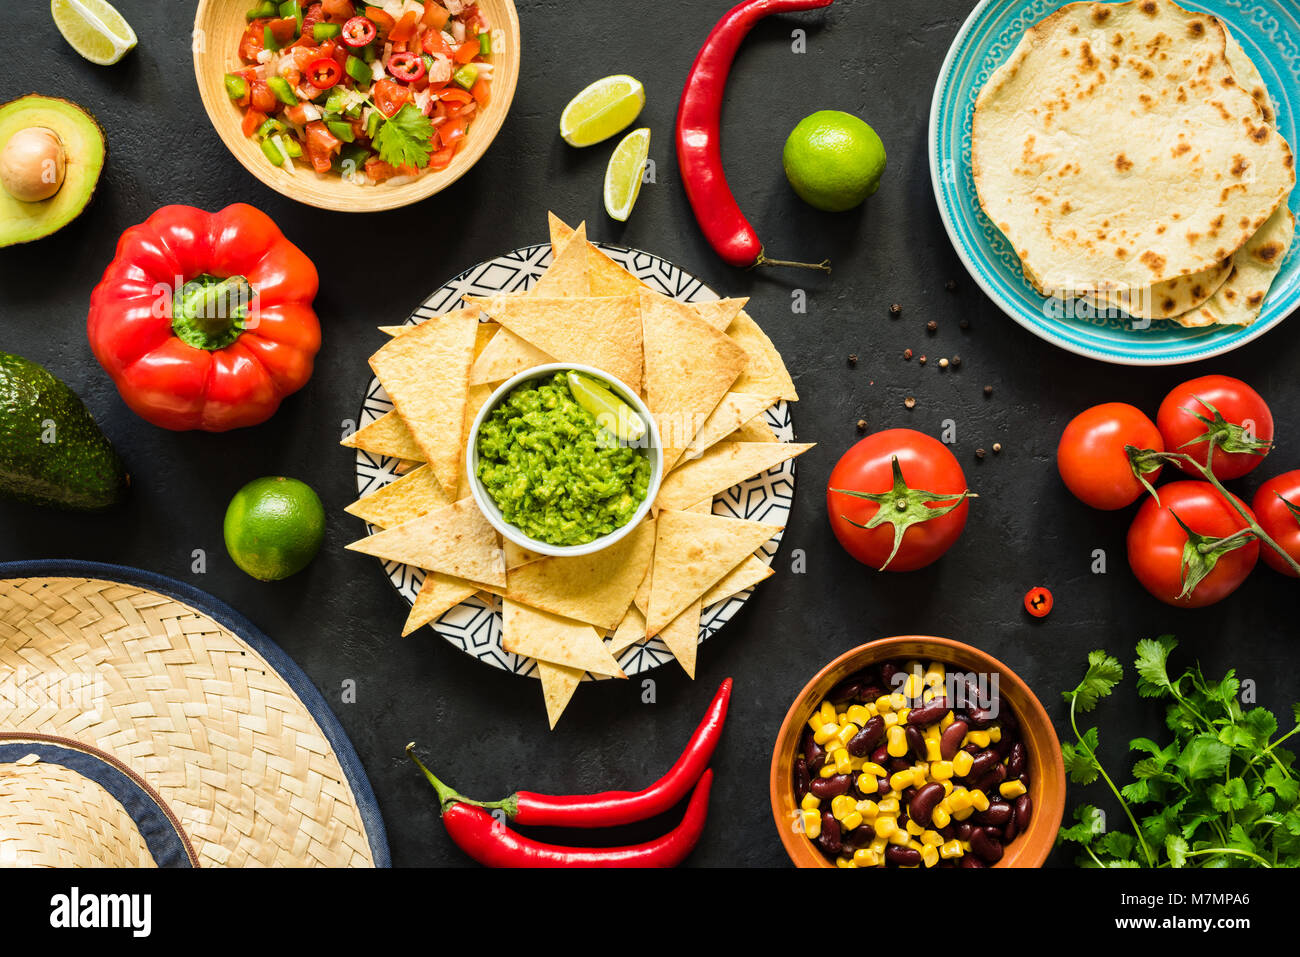 Nachos with guacamole, beans, salsa and tortillas. Mexican food, table top view Stock Photo